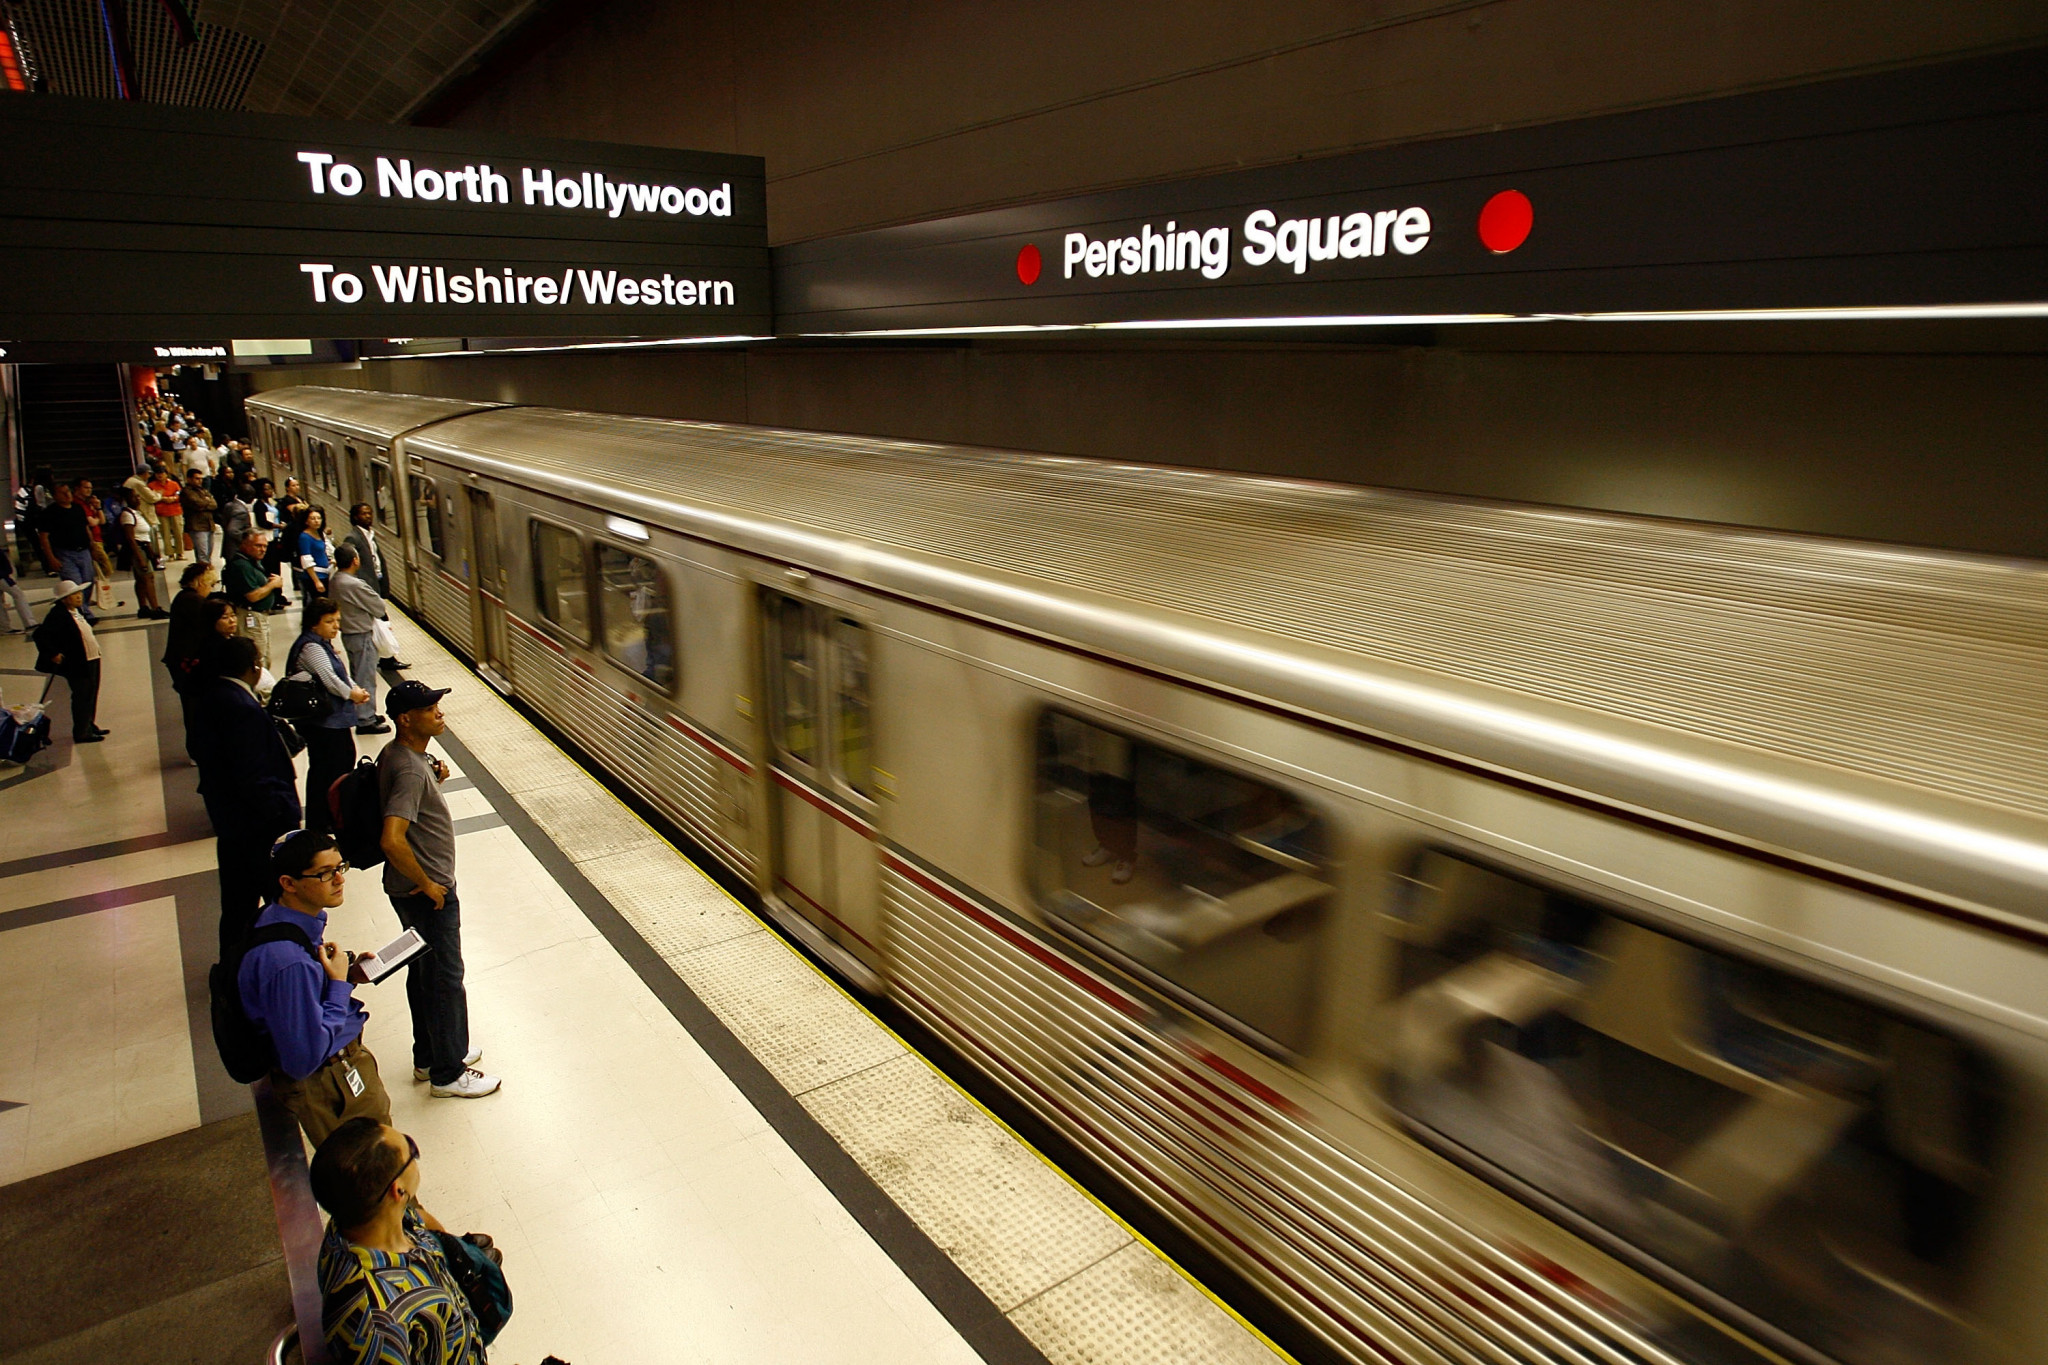 The Los Angeles metro system will play a vital part in Olympic transport in 2028 ©Getty Images